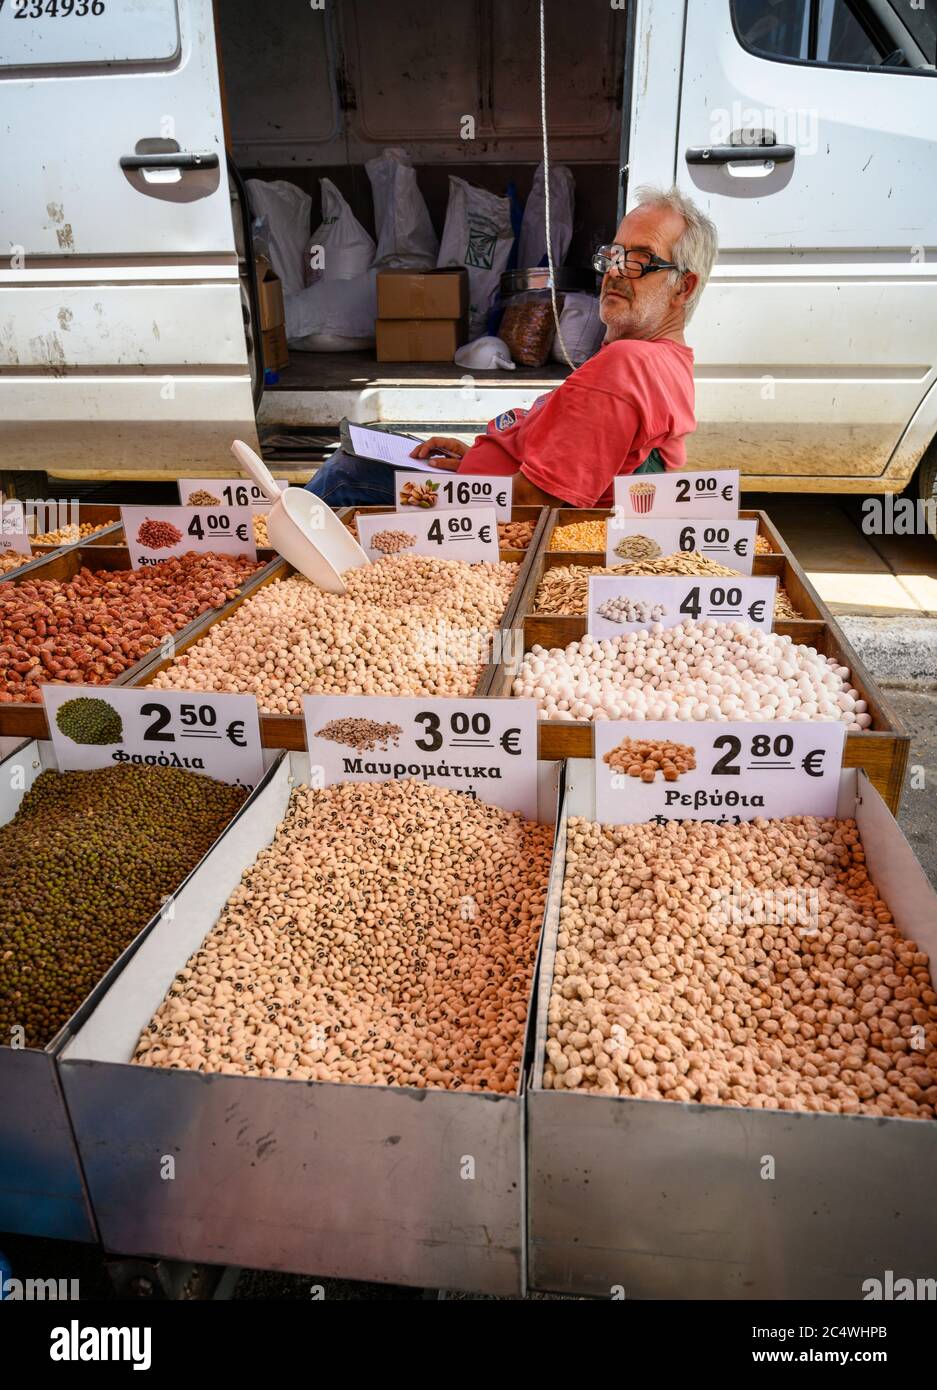 Nuts, beans and pulses for sale at the Sunday market in the small town of Kopanaki, northwestern Messinia, Peloponnese, Greece. Stock Photo